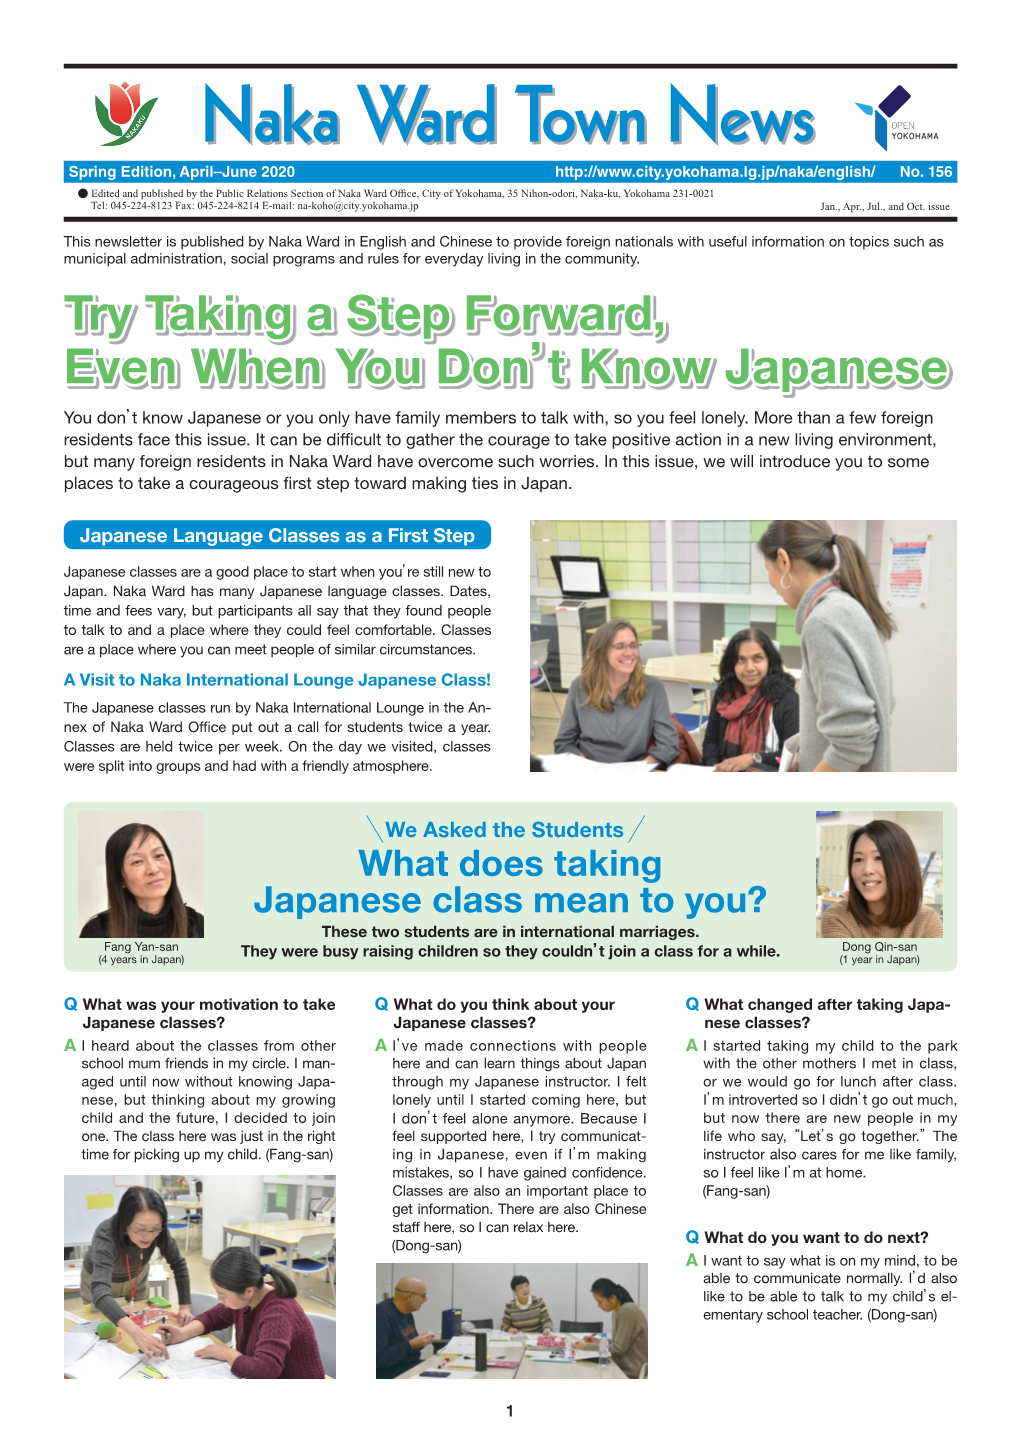 Try Taking a Step Forward, Even When You Don't Know Japanese